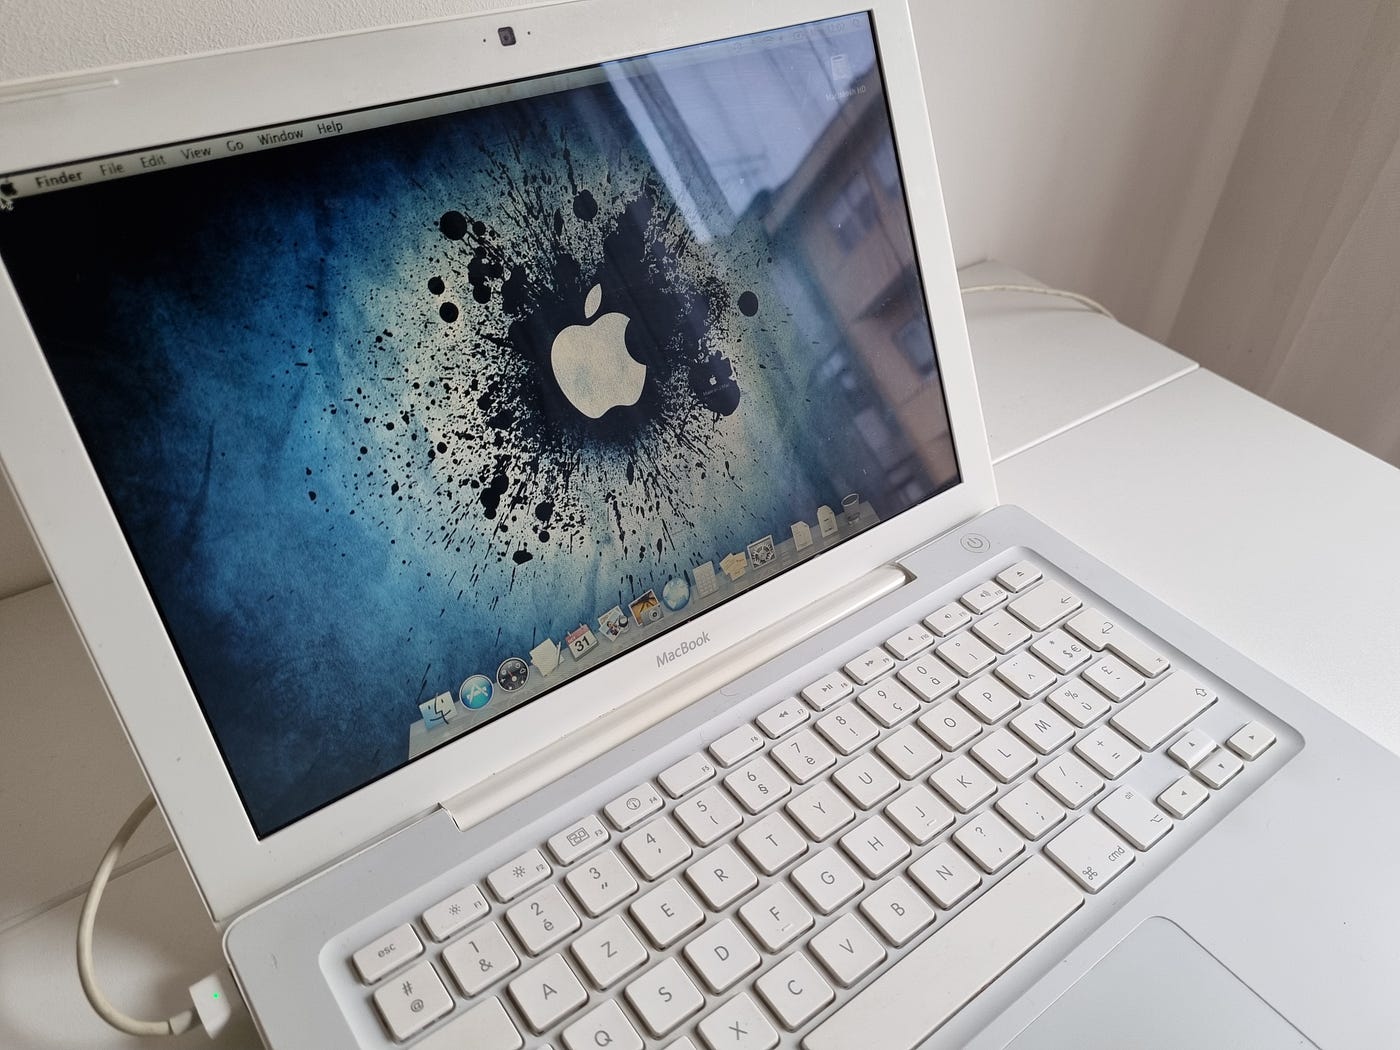 Legacy System Review: MacBook 1.1 Plastic White 2006 | by Carla Martins |  Medium